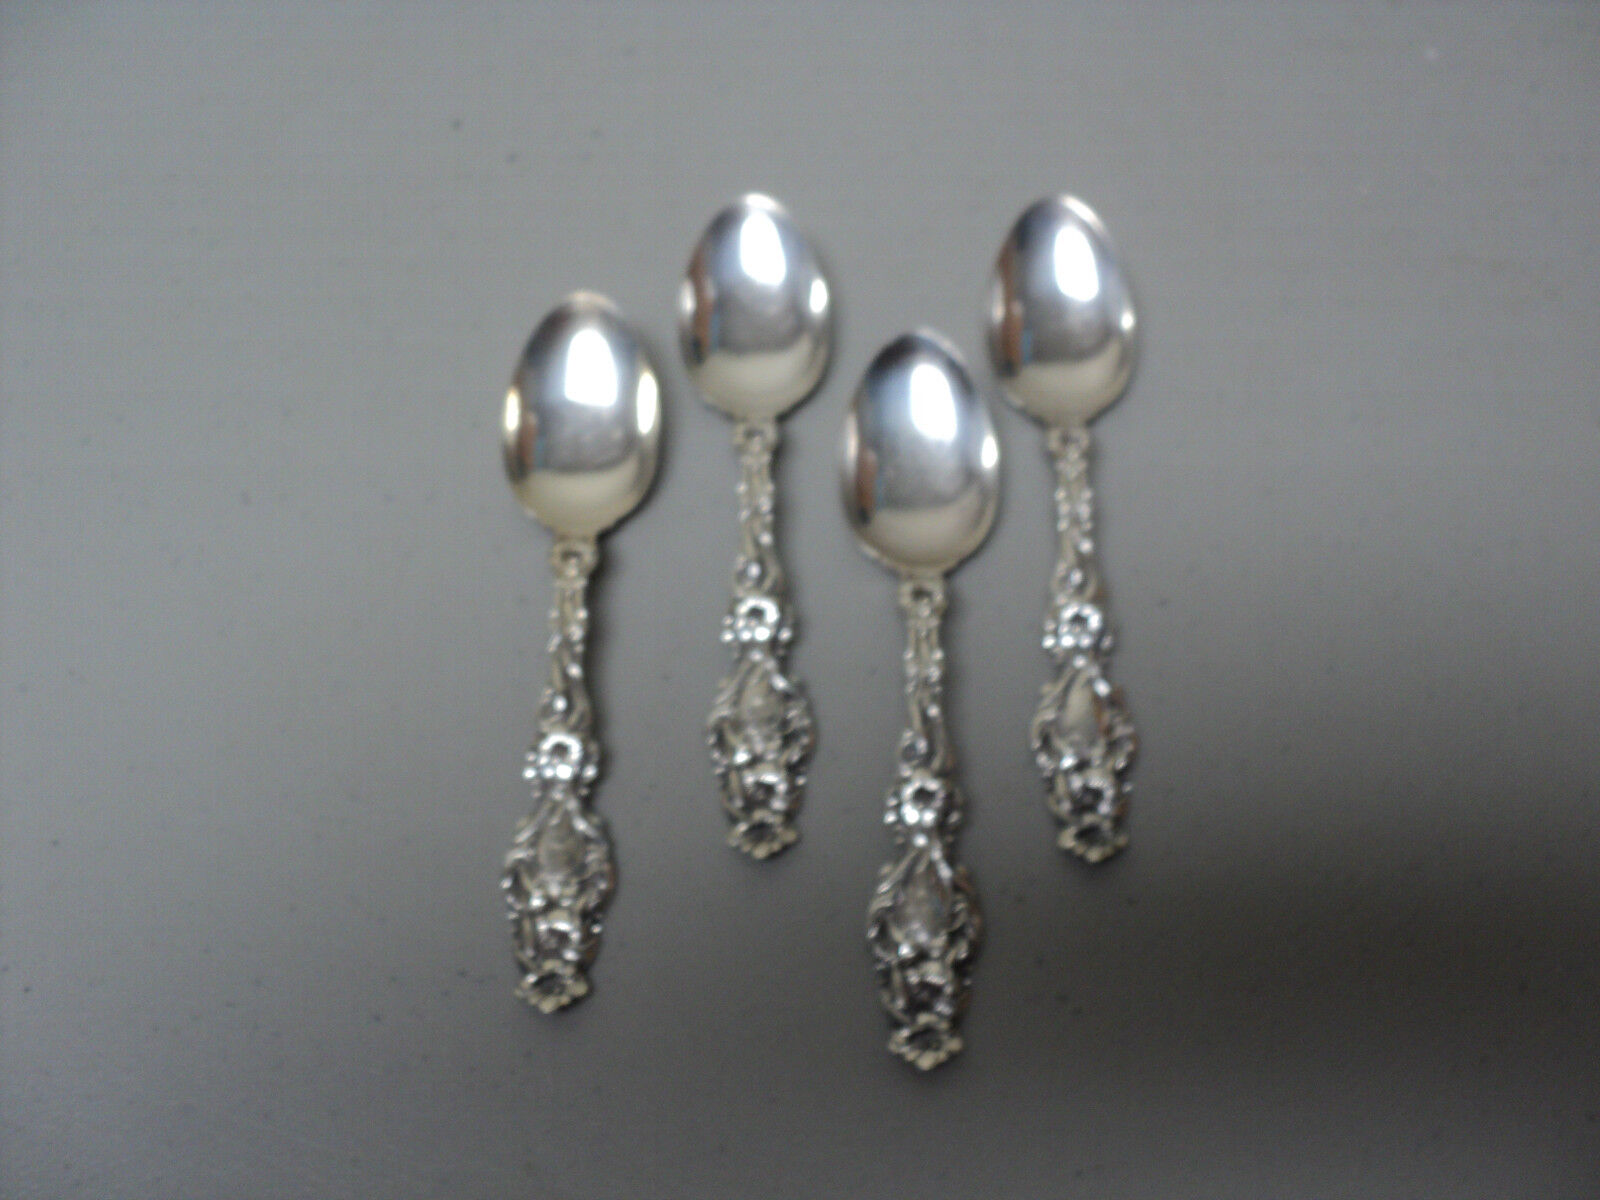  Set/4 Whiting LILY Sterling Silver Teaspoons, Monogram \